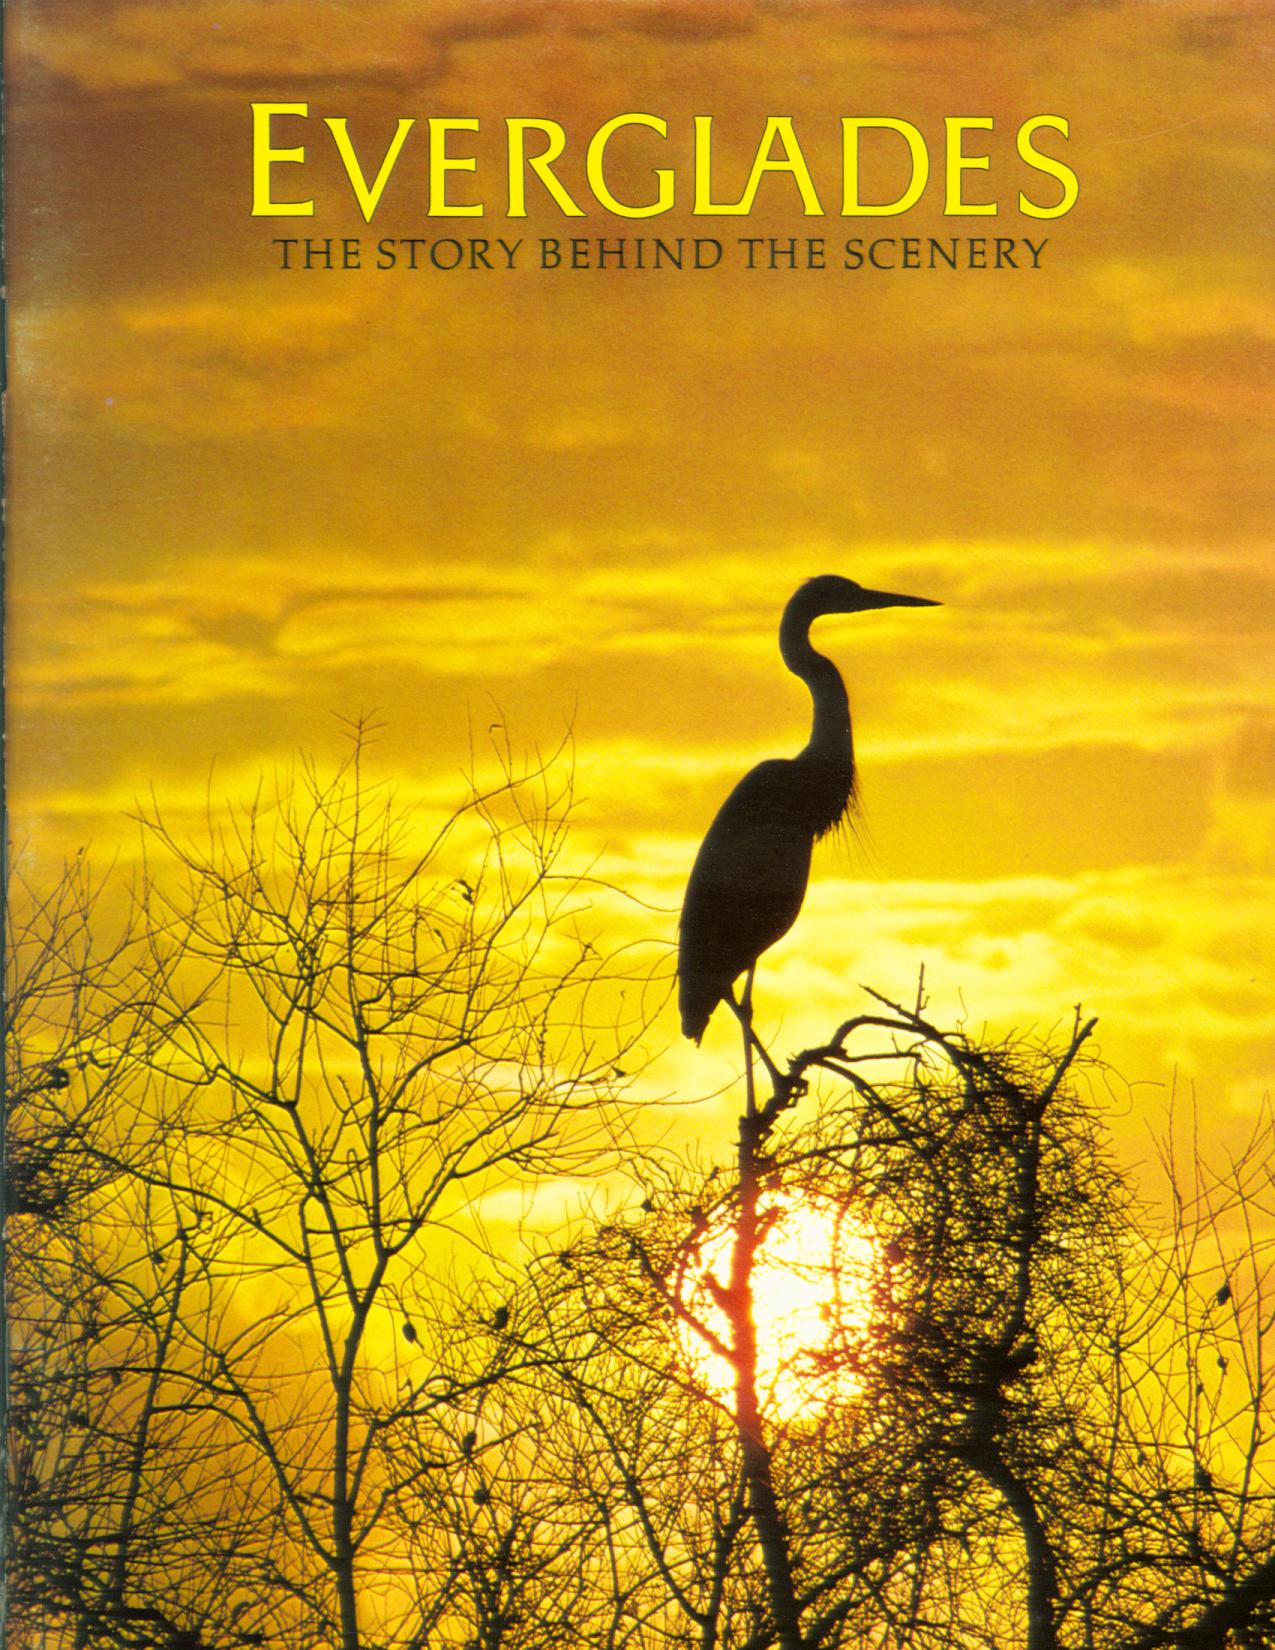 EVERGLADES: the story behind the scenery (FL). 